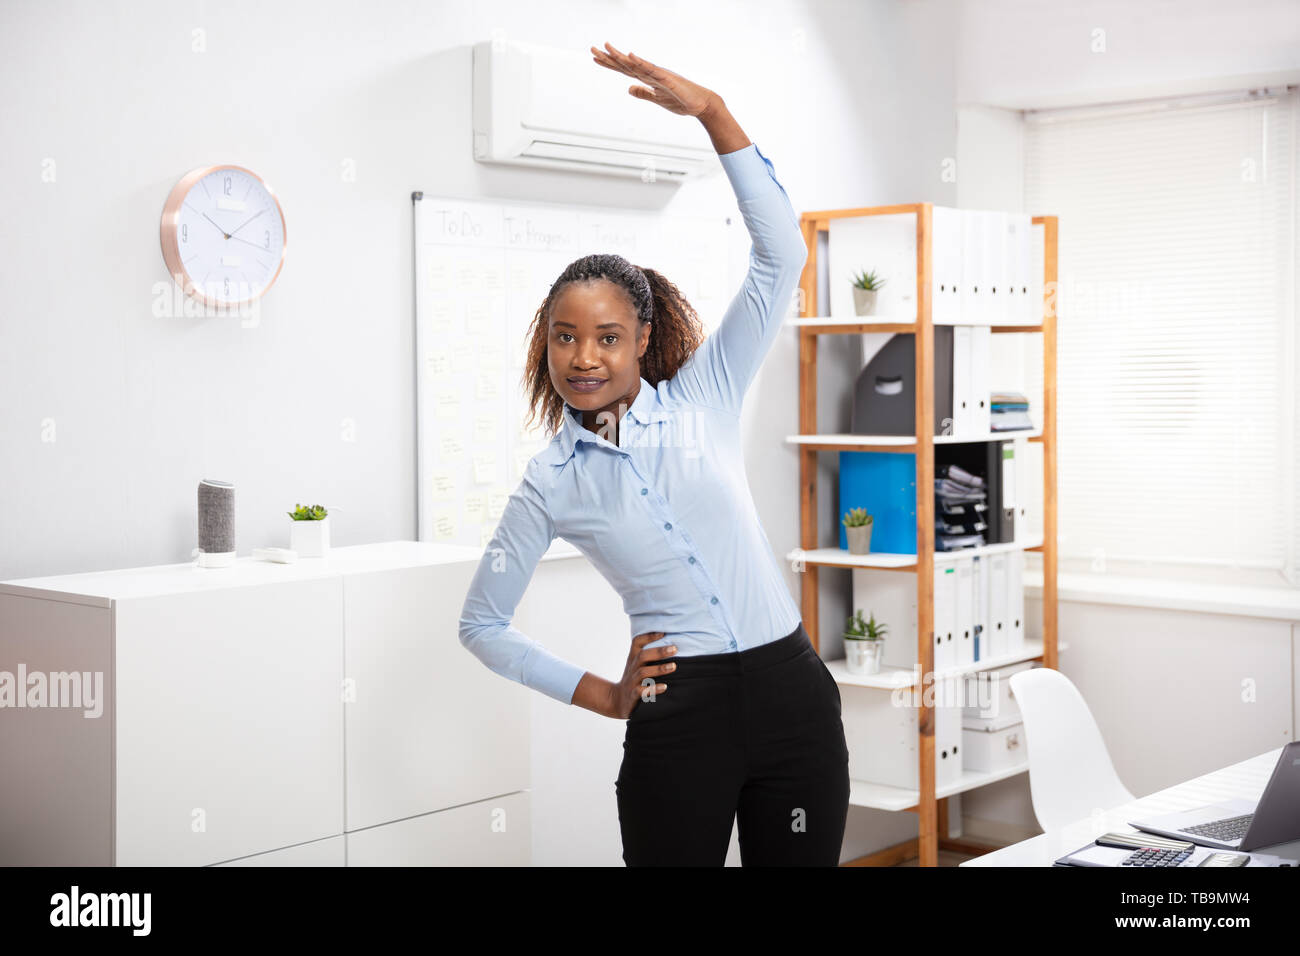 Young Businesswoman Doing Yoga Standing In Front Of Office Desk